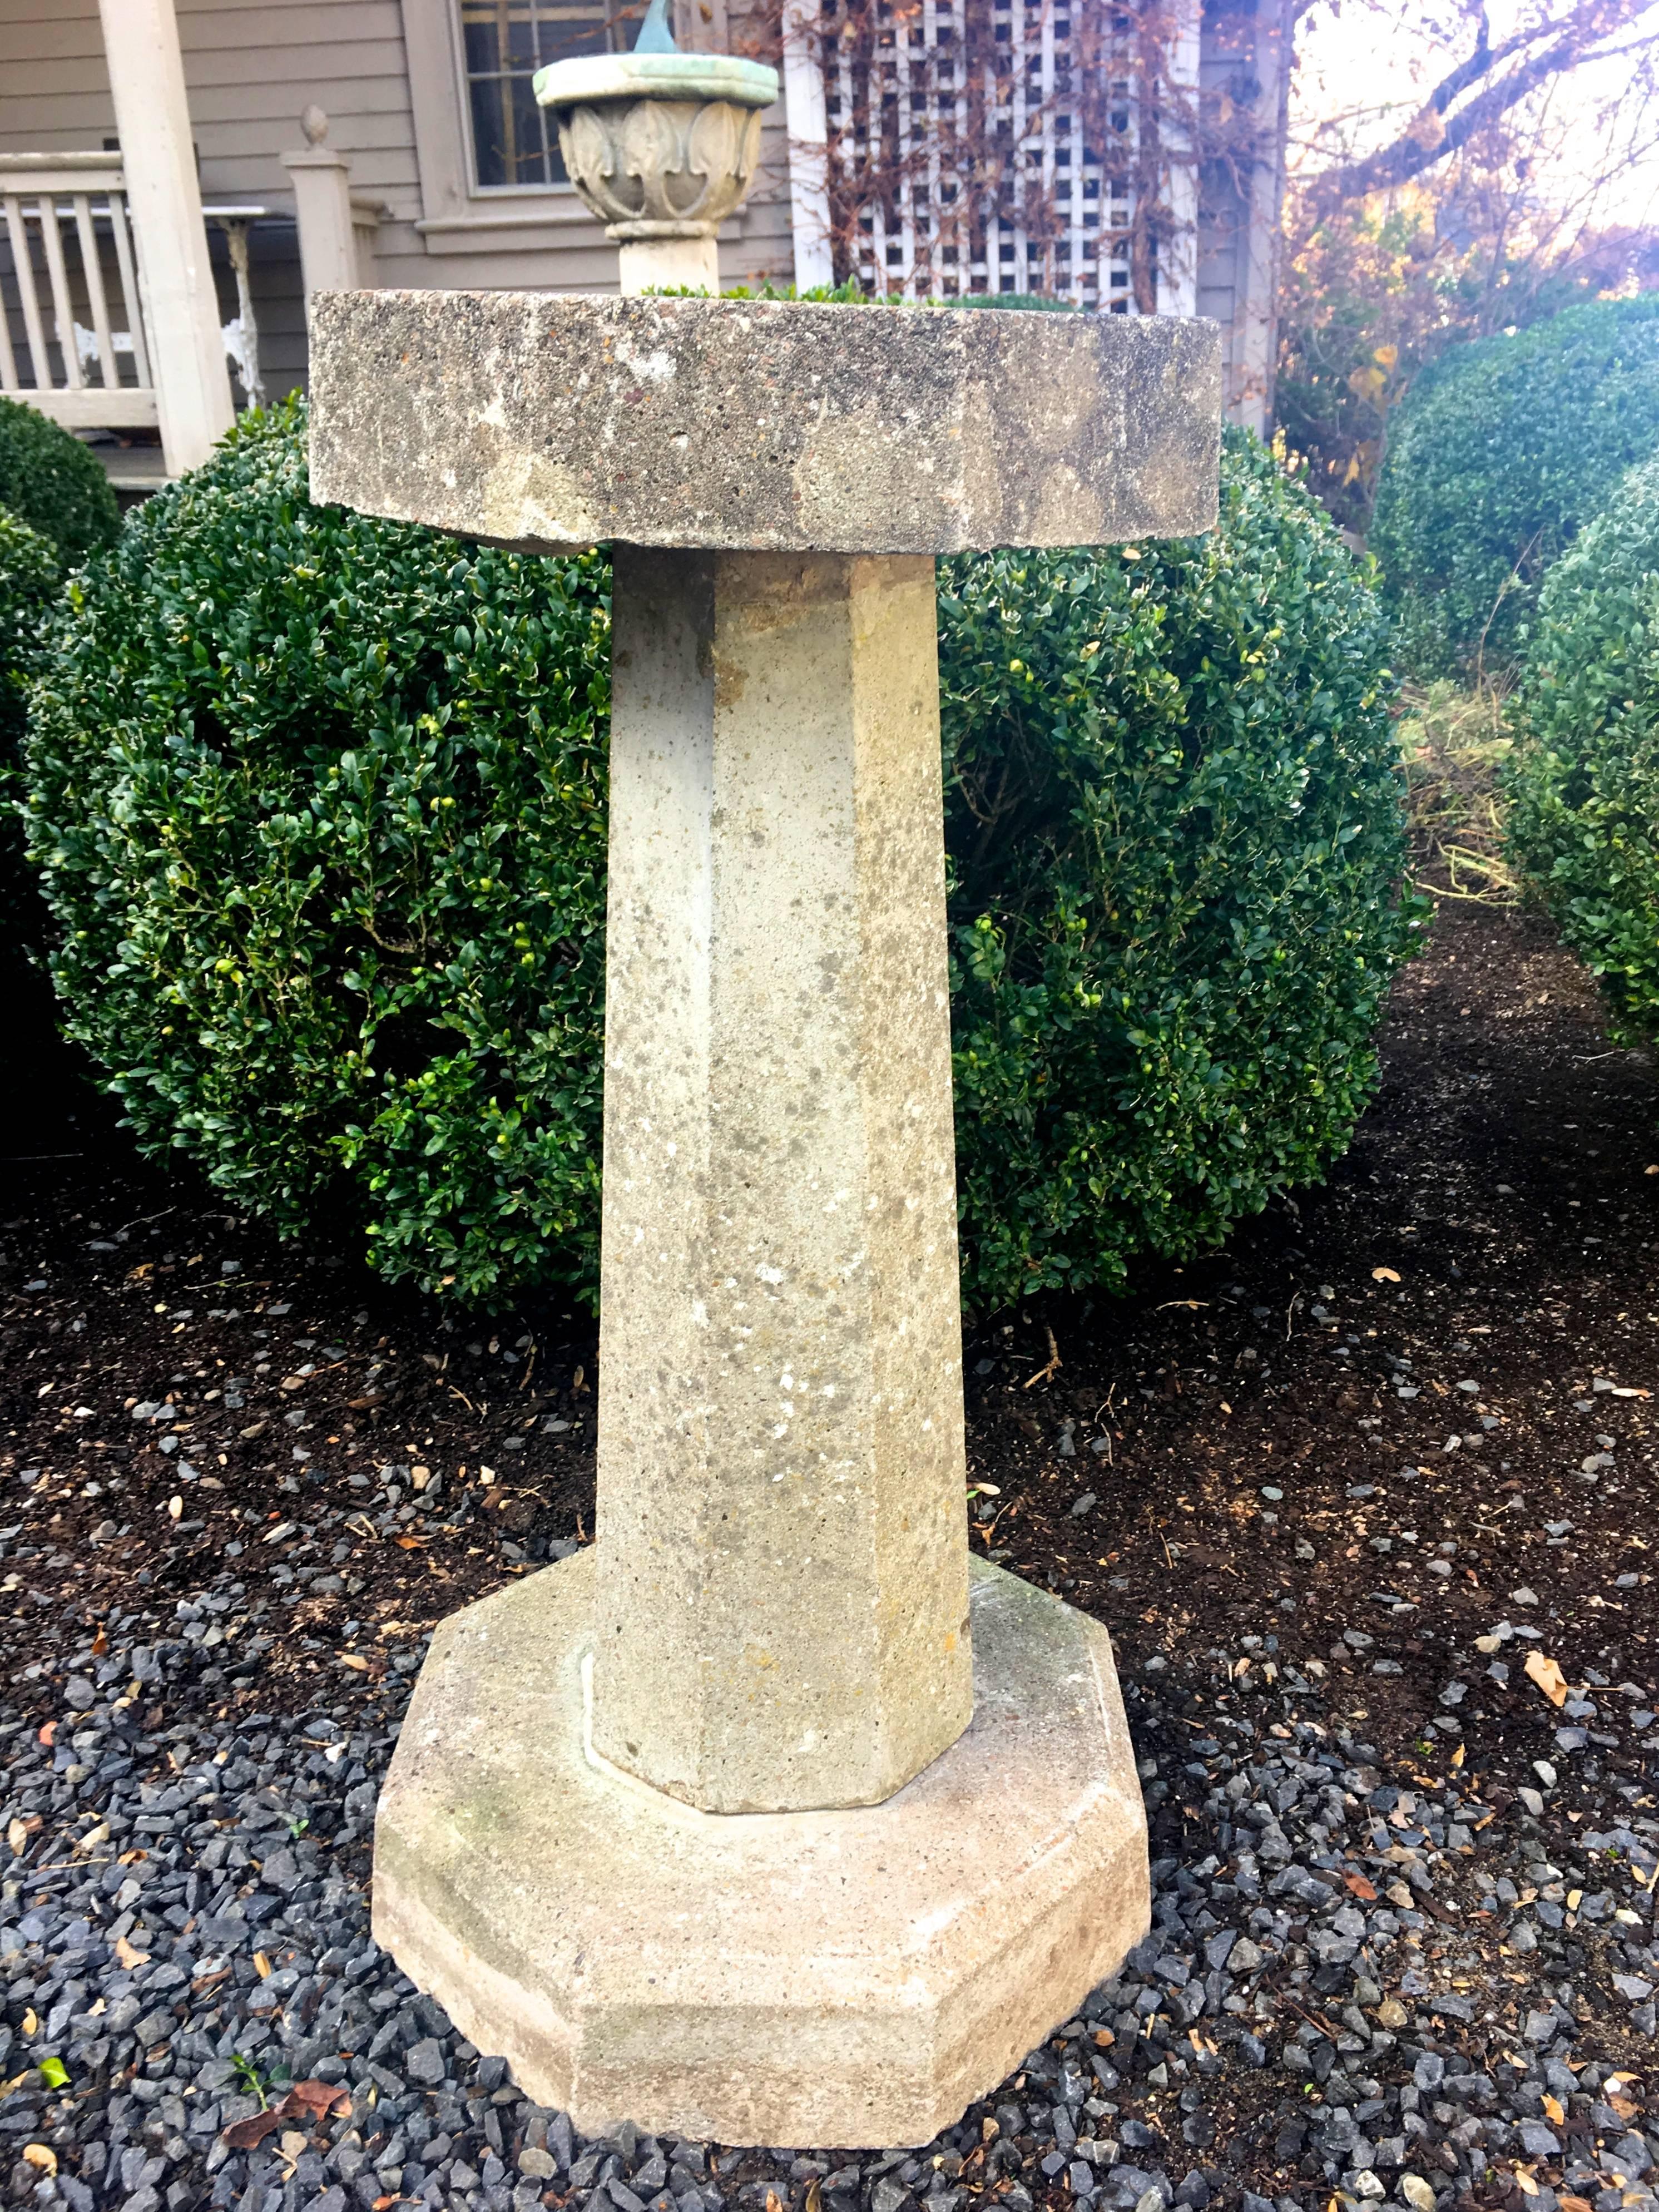 This charming octagonal cast stone birdbath in three parts is the perfect accent piece for your herb garden. Your feathered friends will appreciate its shallow bowl (they like to stand when drinking) and the lovely weathered surface will add an